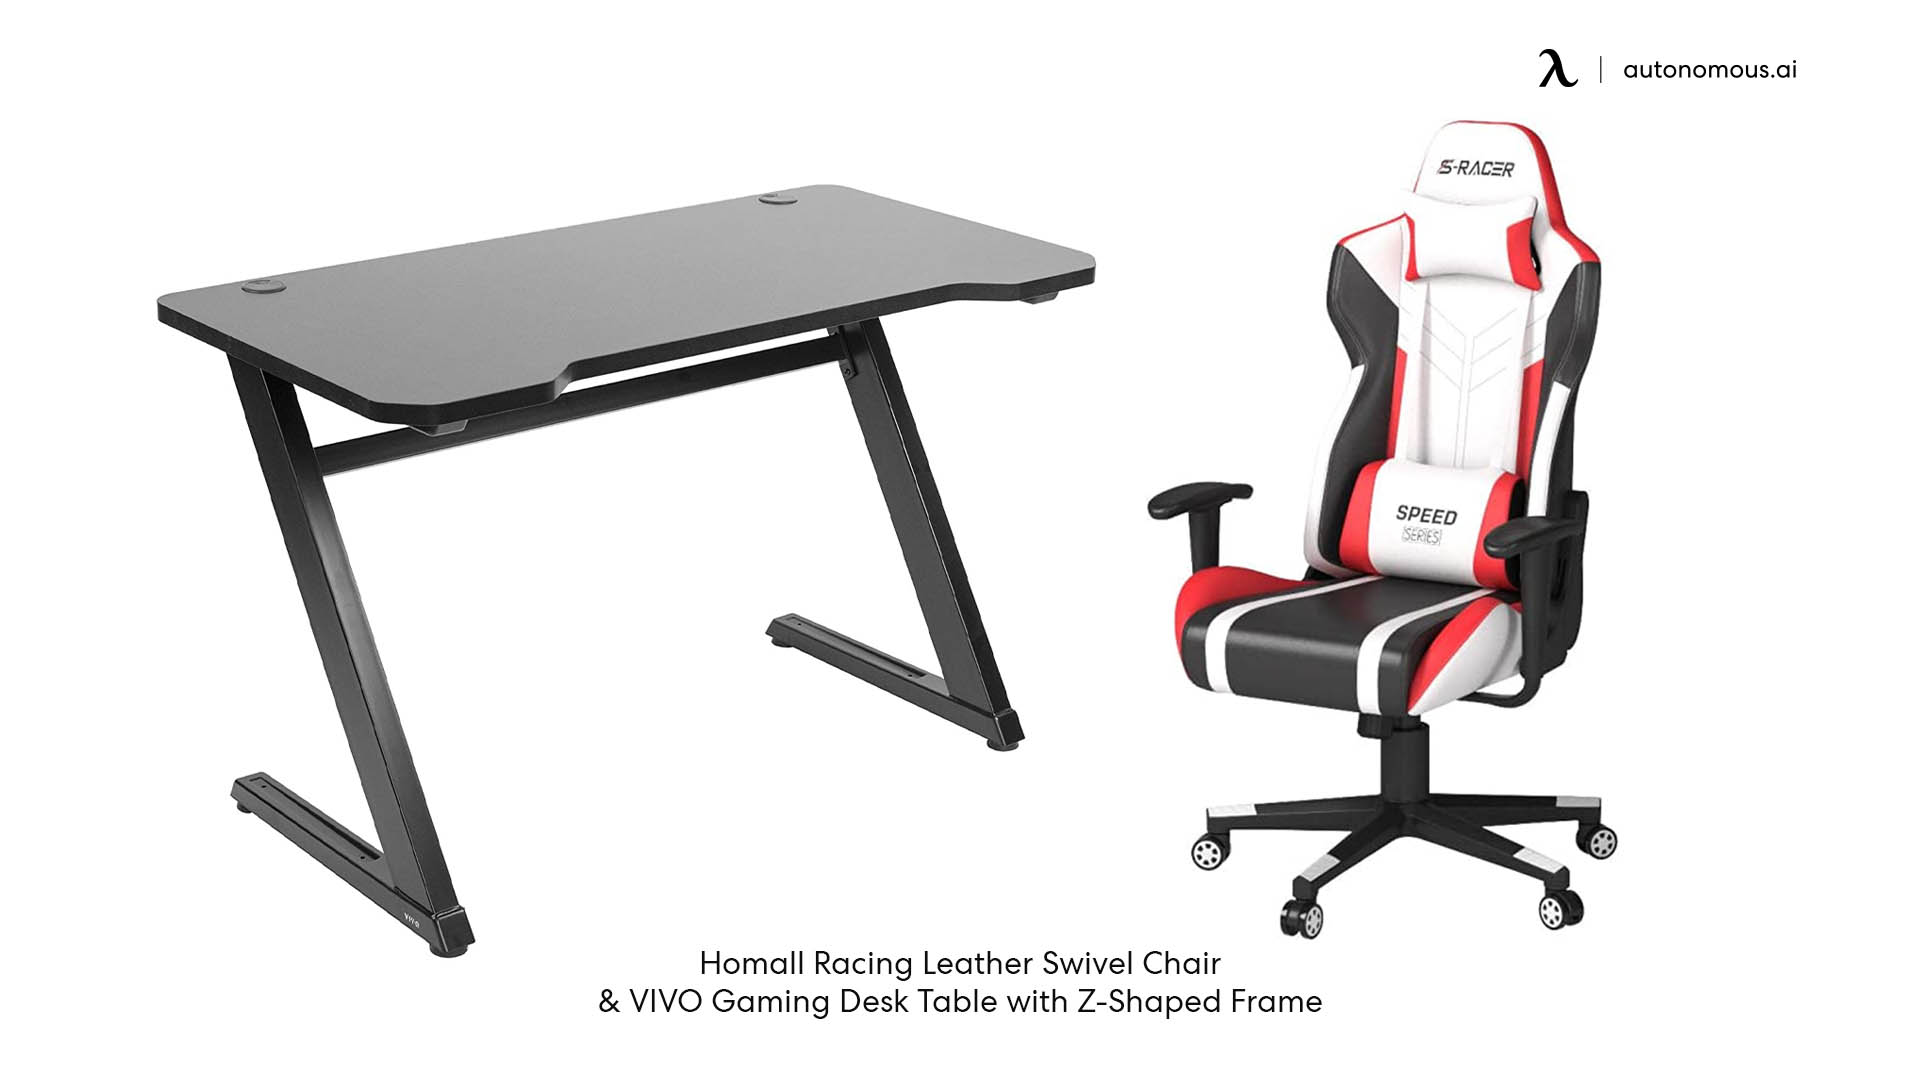 Homall Racing Leather Swivel Chair and Z-shaped Desk